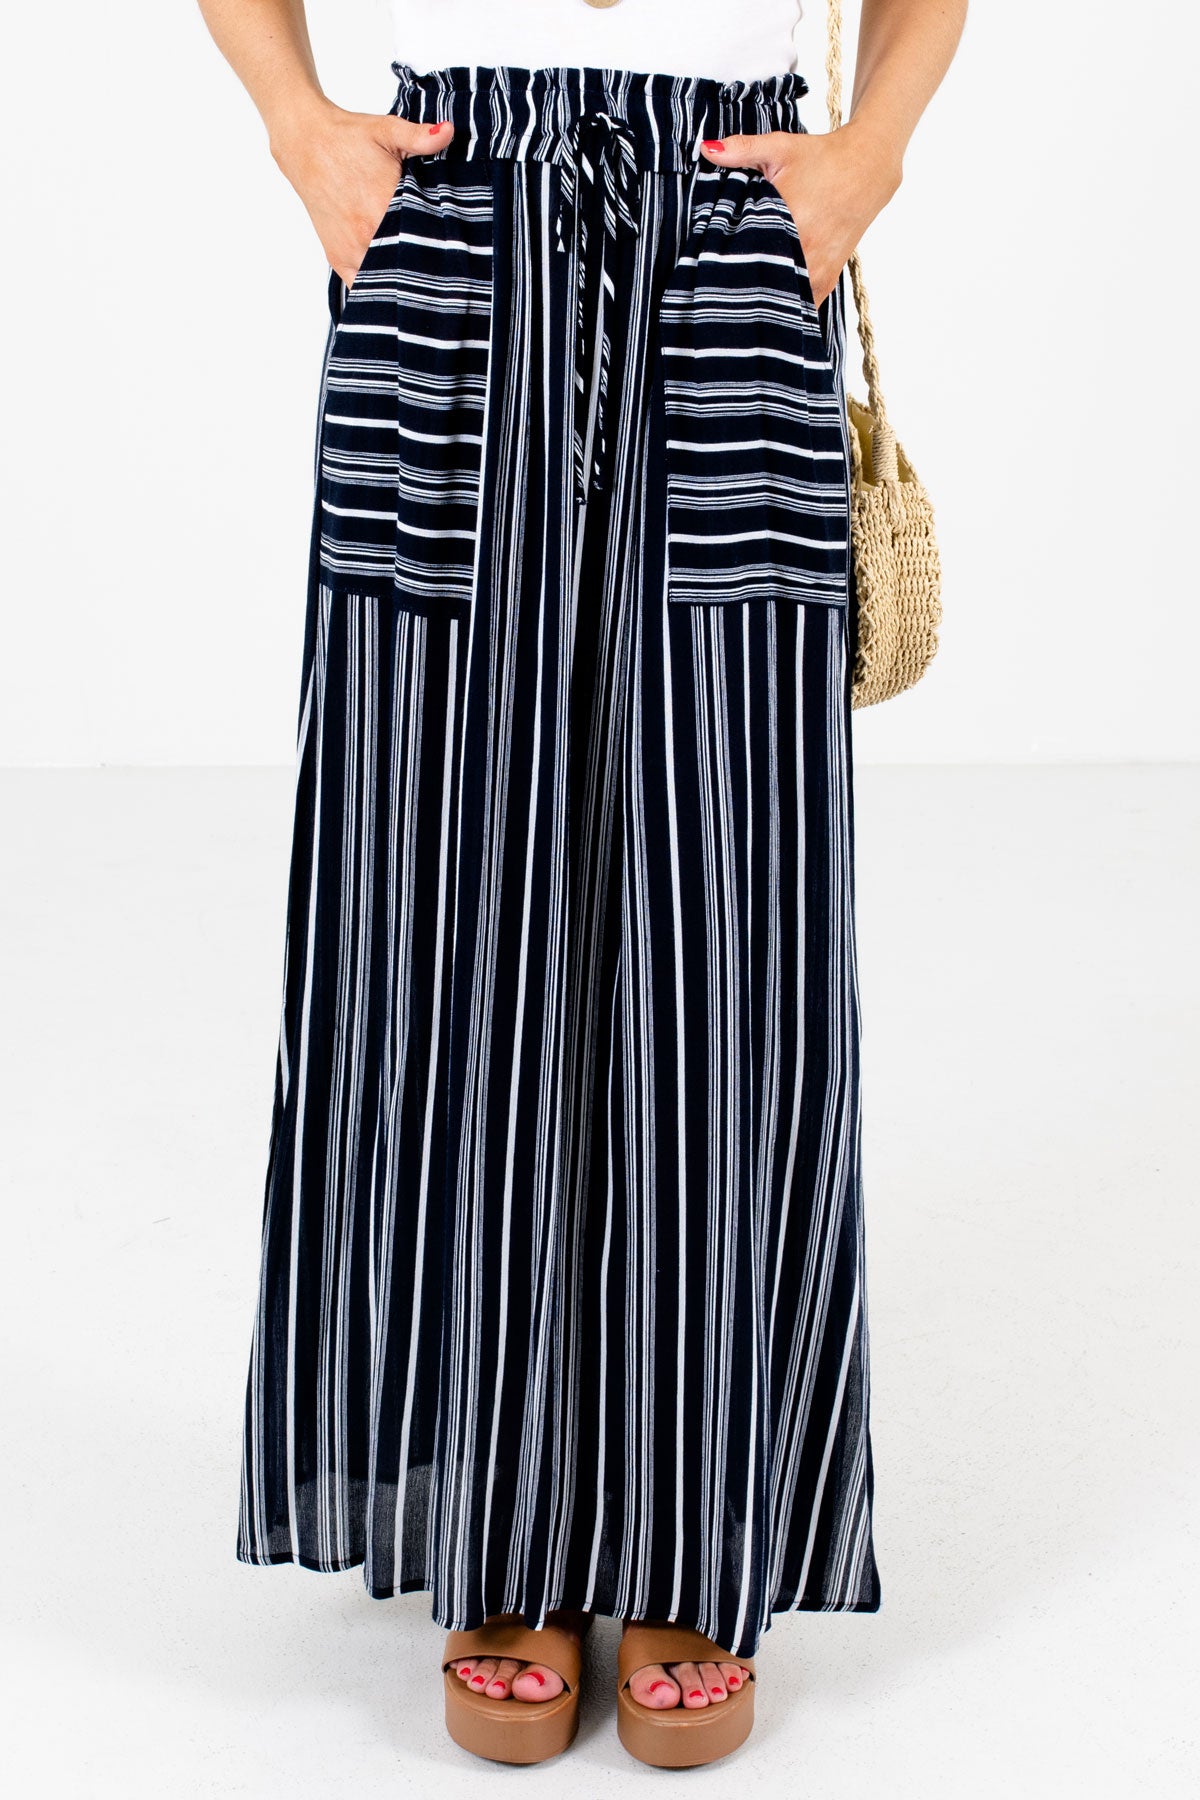 Navy Blue and White Striped Boutique Skirts for Women